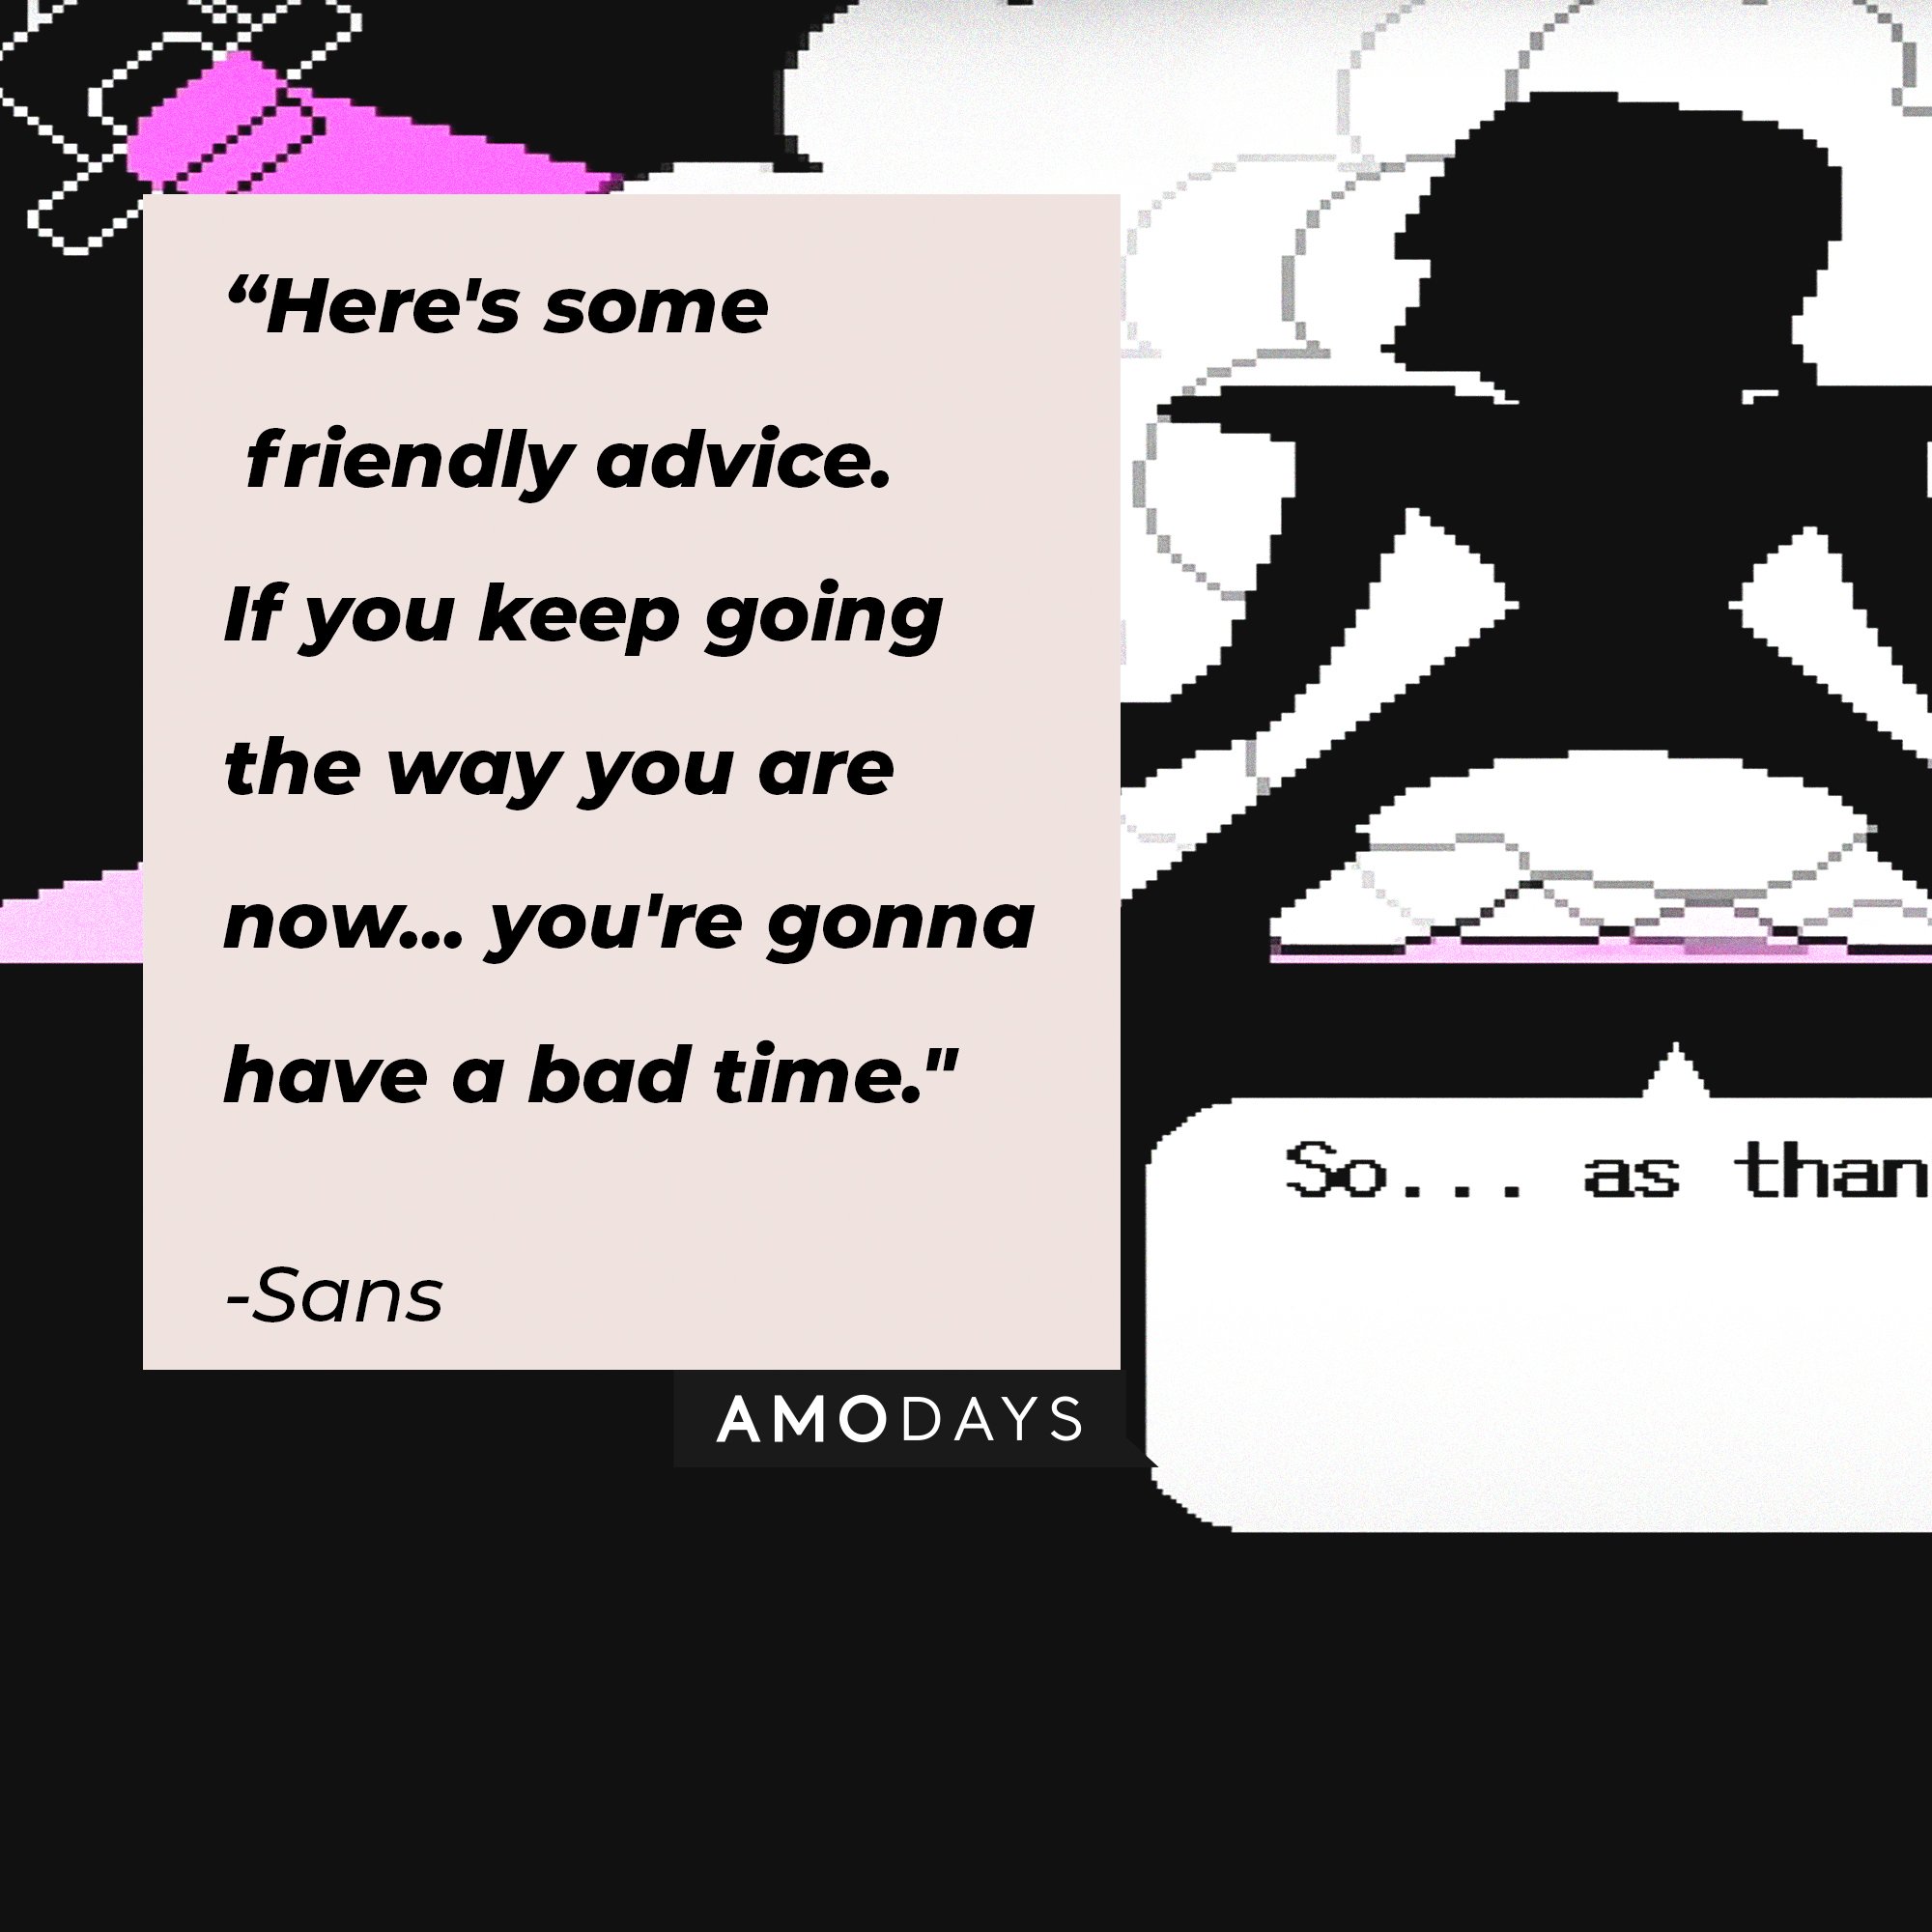 Sans’ quote: "Here's some friendly advice. if you keep going the way you are now... you're gonna have a bad time." | Image: AmoDays